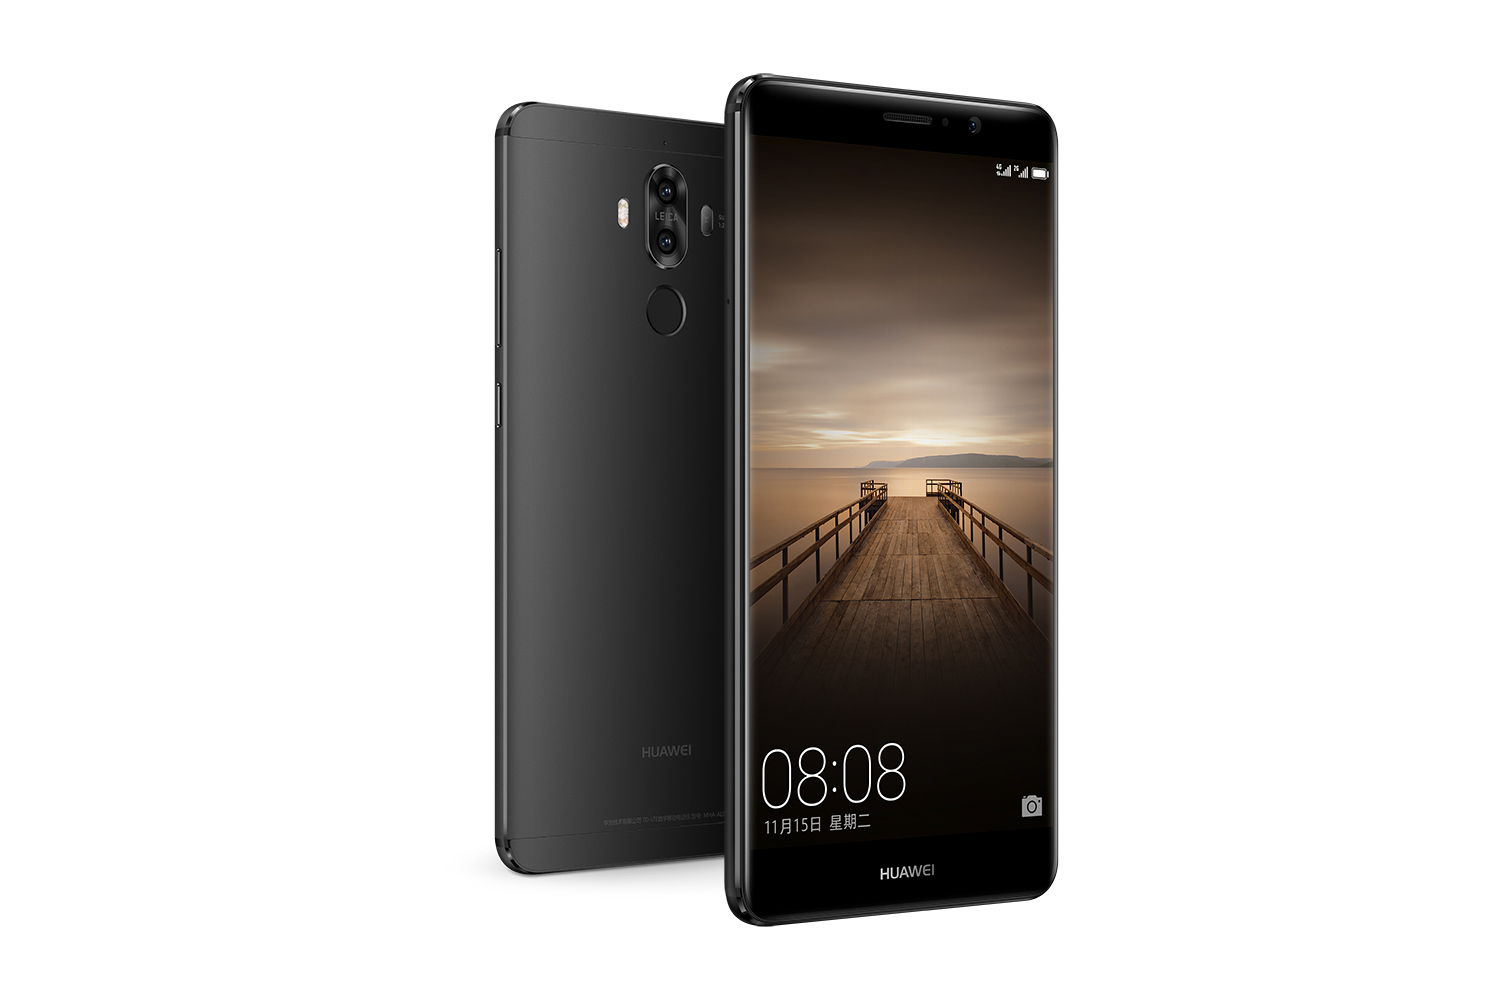 Huawei Announces Mate 9 Black Limited Edition, Available from March 3